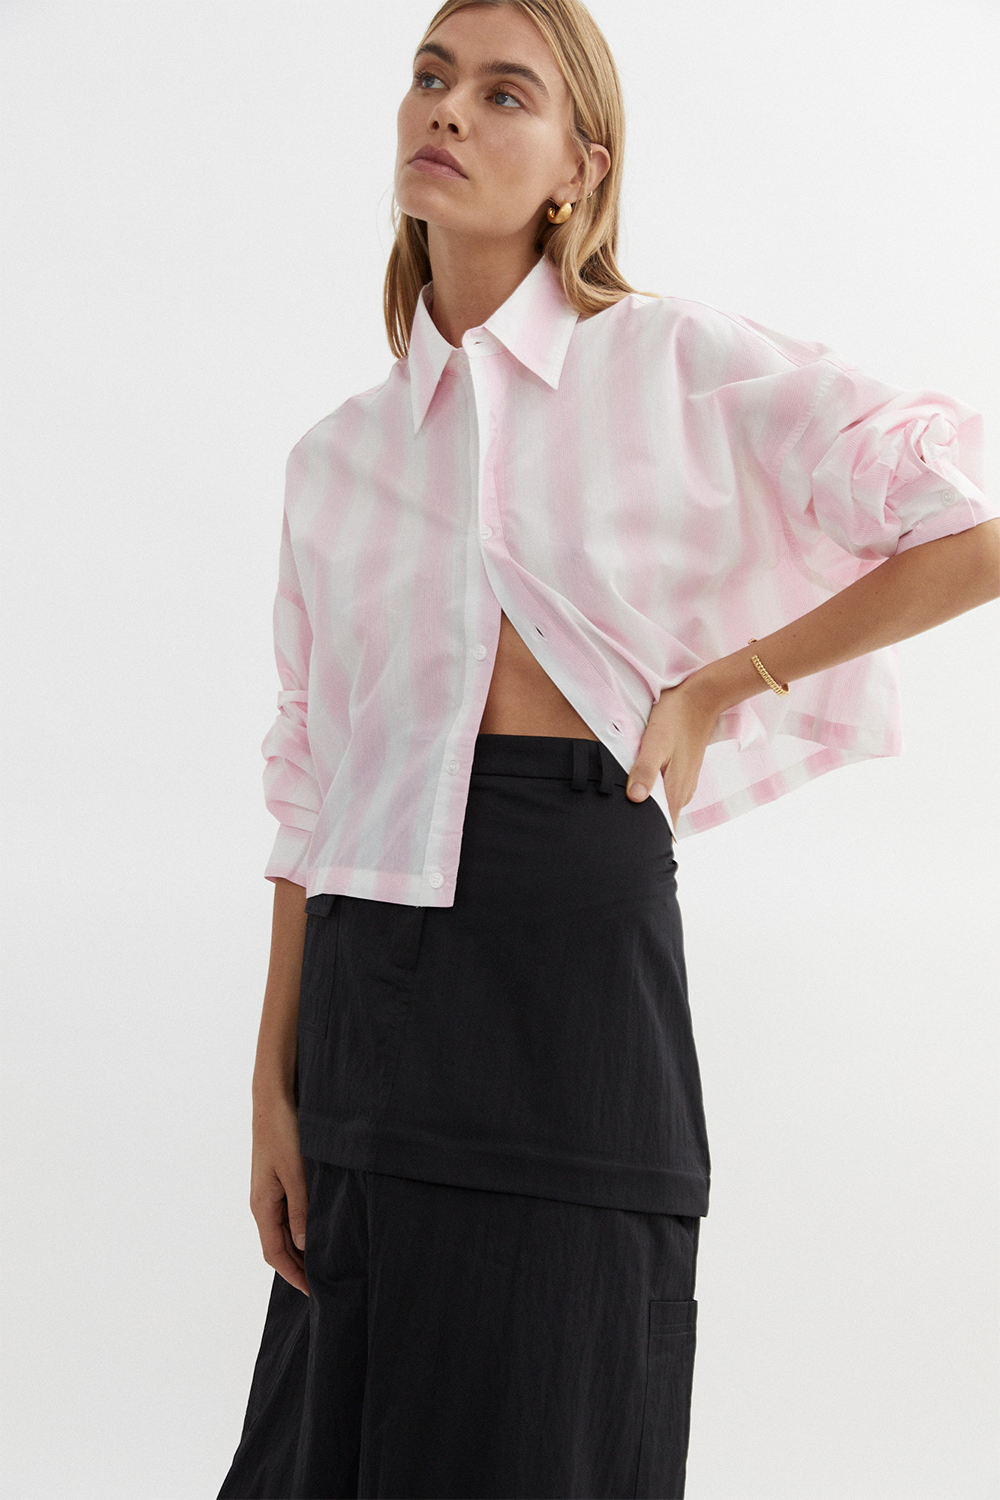 Thomas Pink Womens Button Down Shirts in Womens Tops 